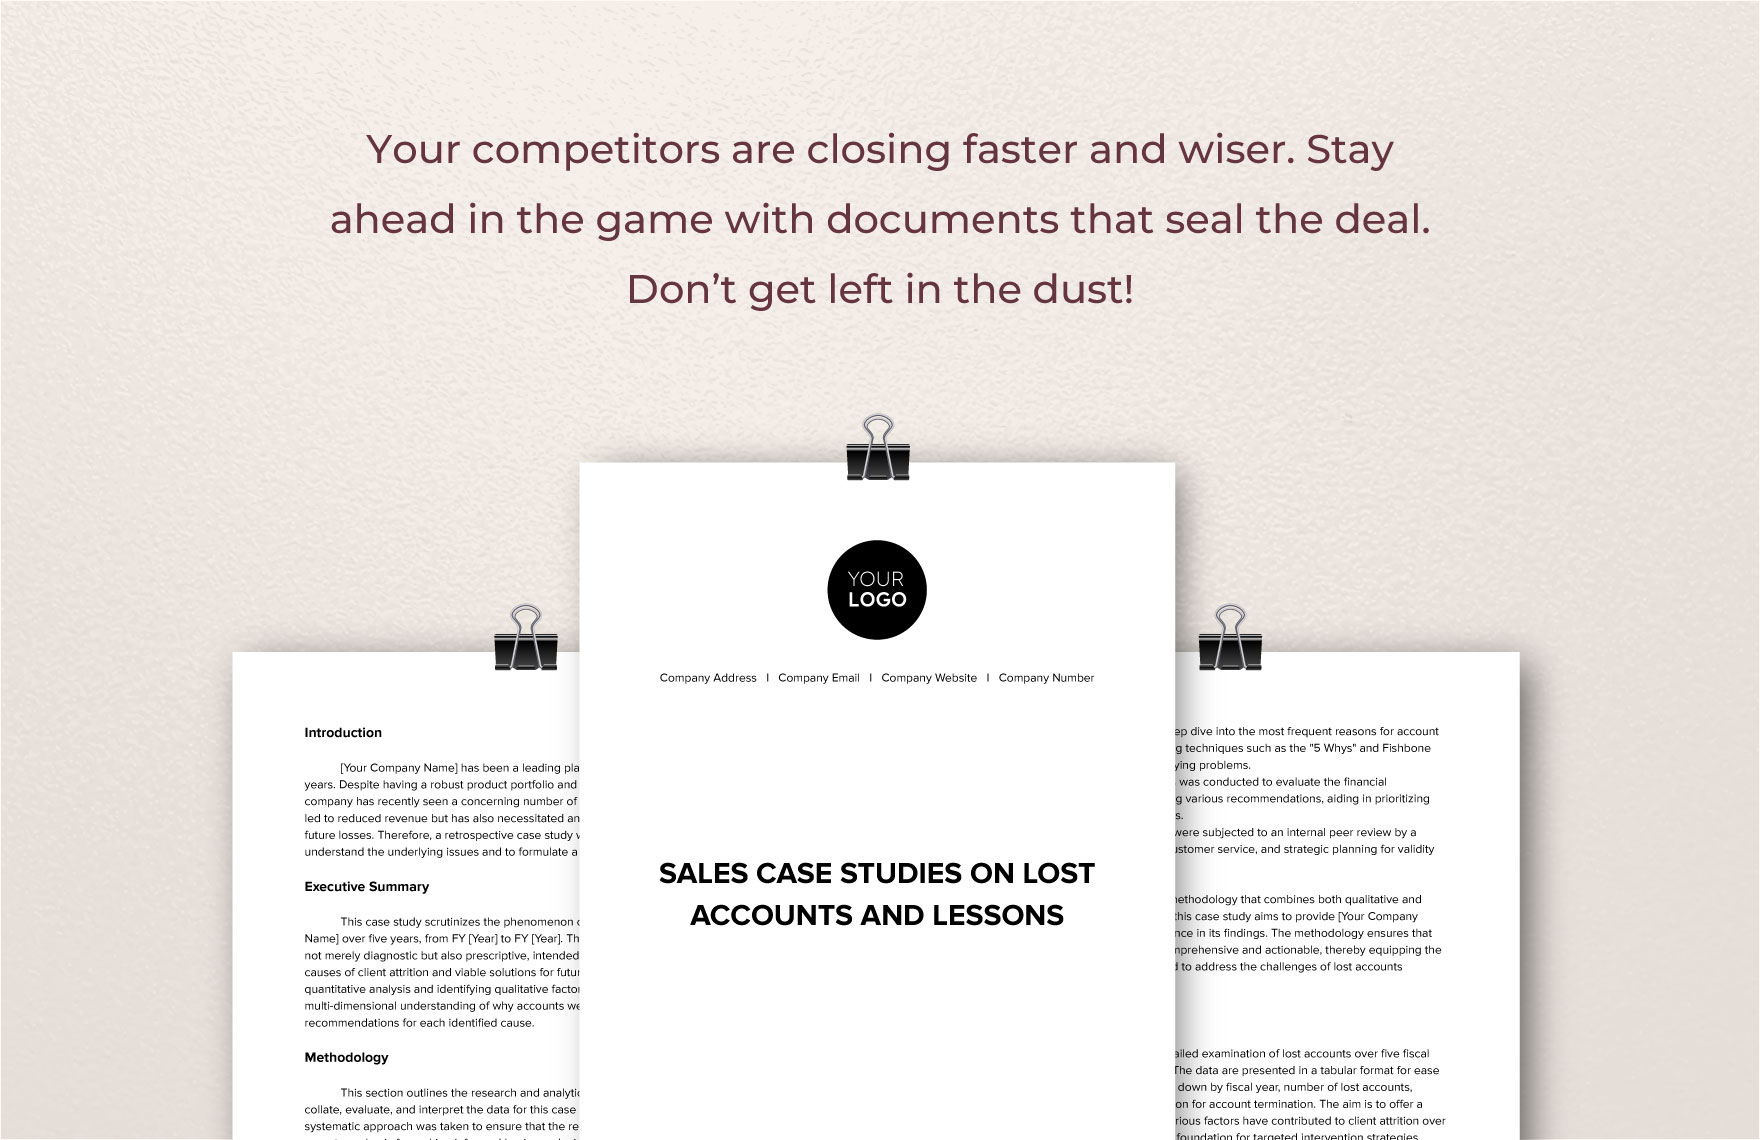 Sales Case Studies on Lost Accounts and Lessons Template